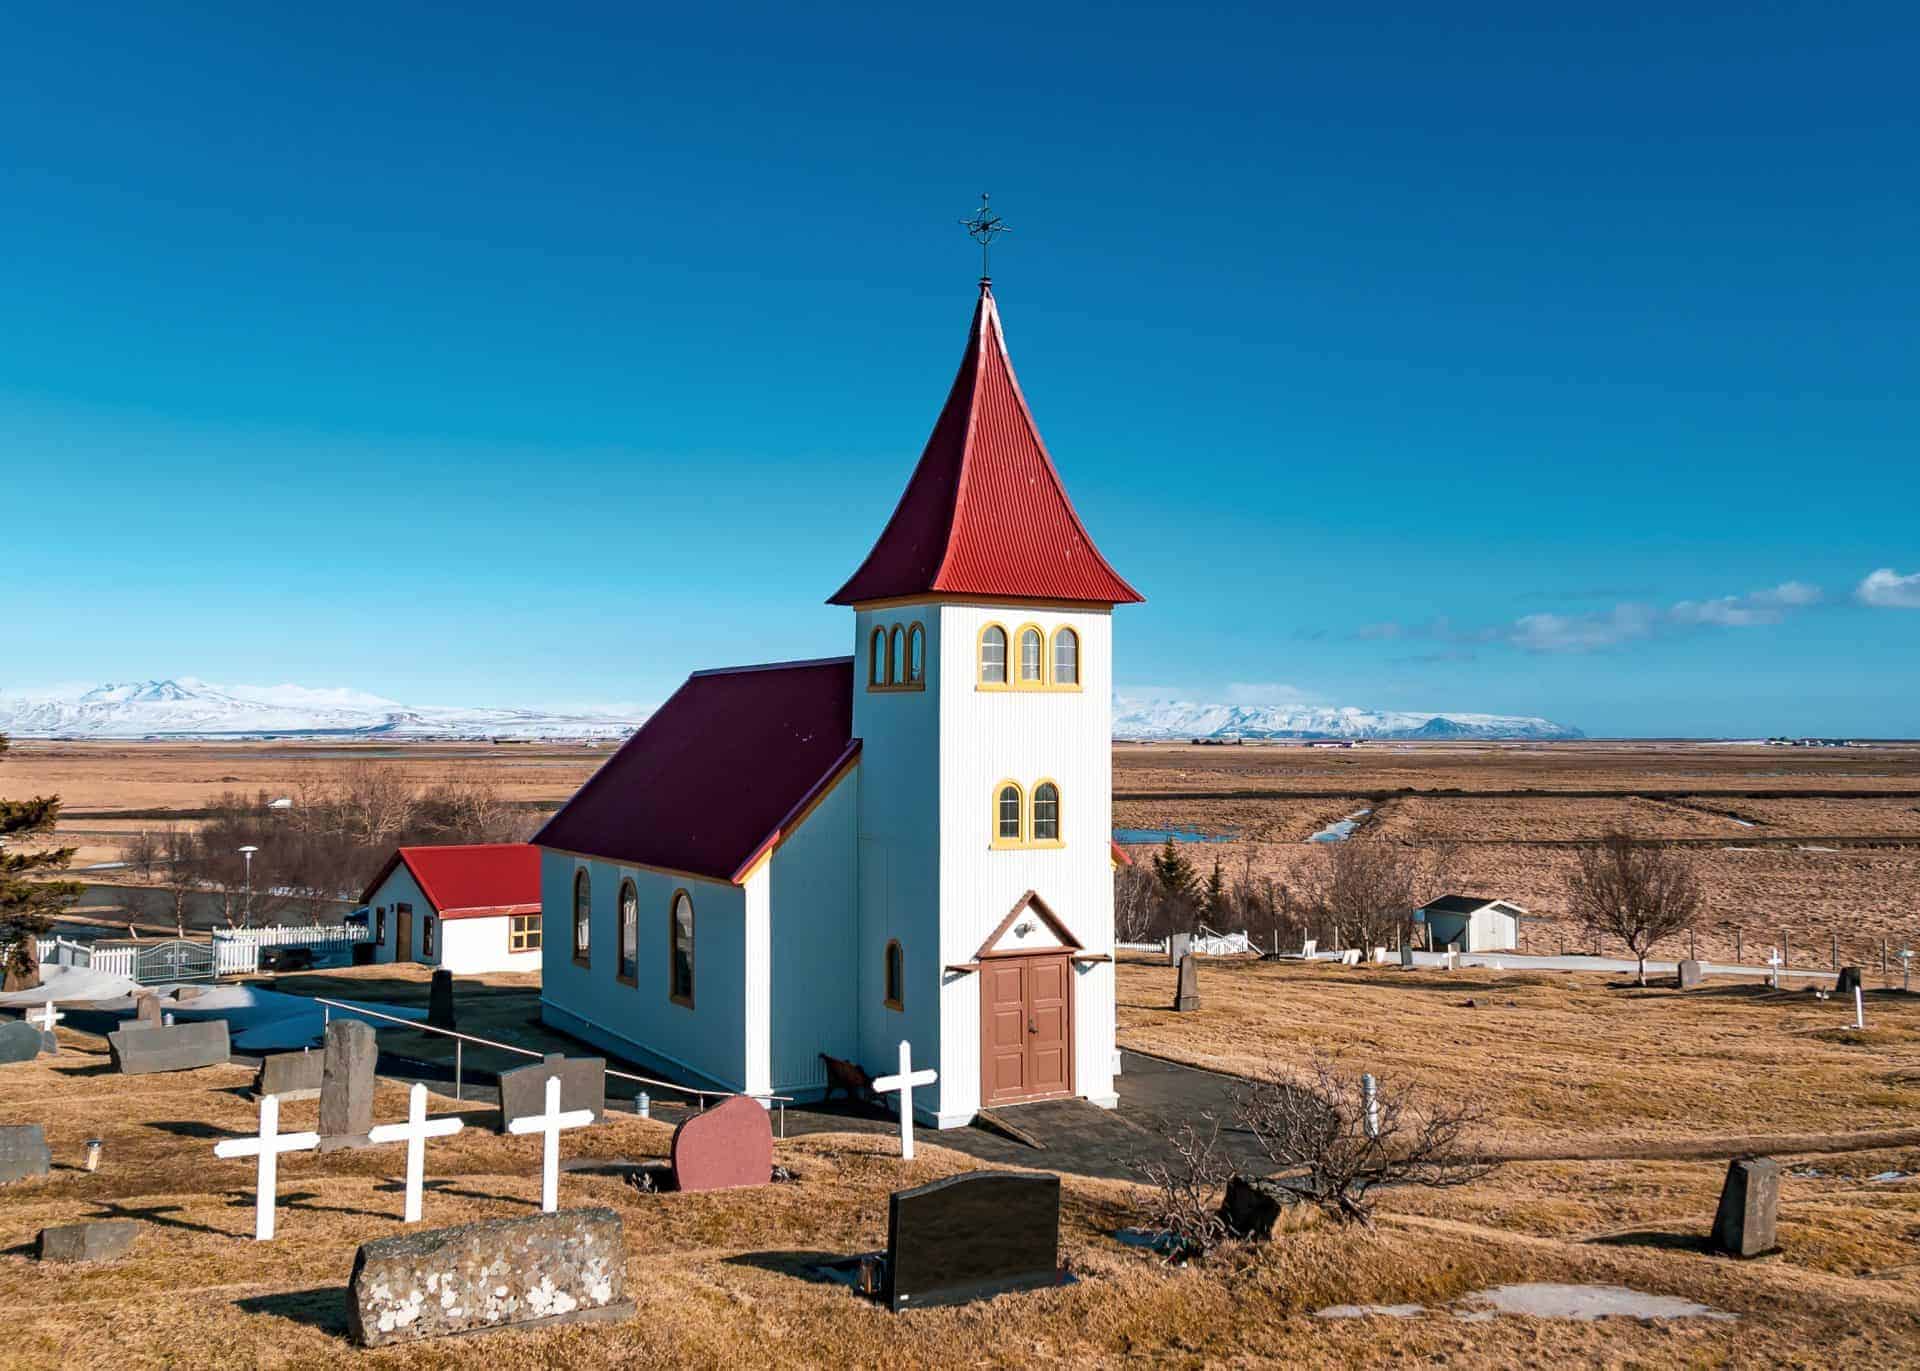 The Oddakirkja church - white with a red roof - is located just beside a small cemetery.